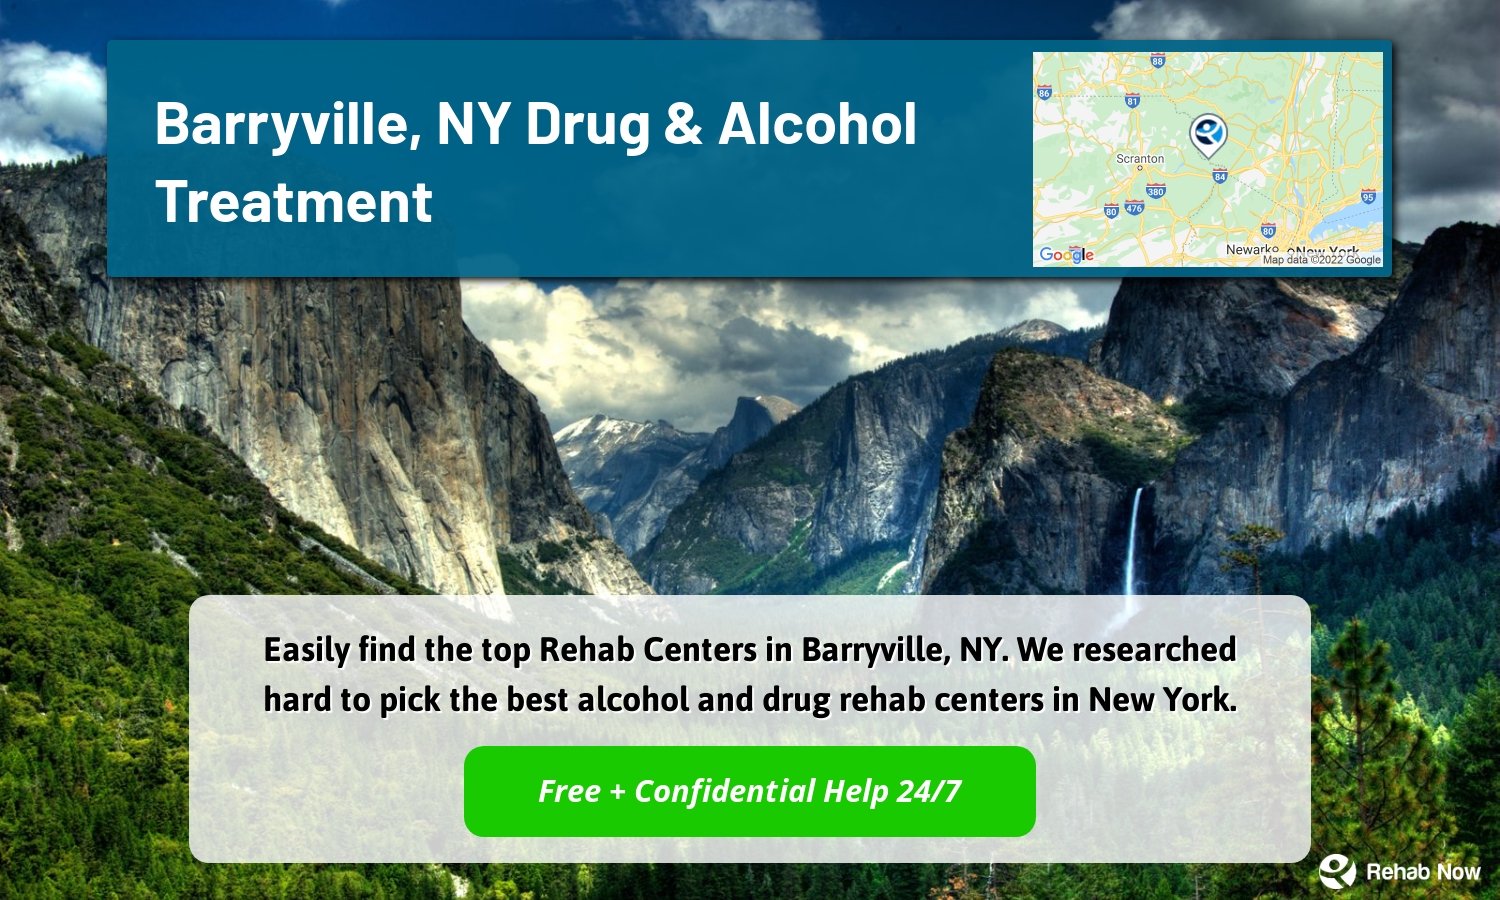 Easily find the top Rehab Centers in Barryville, NY. We researched hard to pick the best alcohol and drug rehab centers in New York.